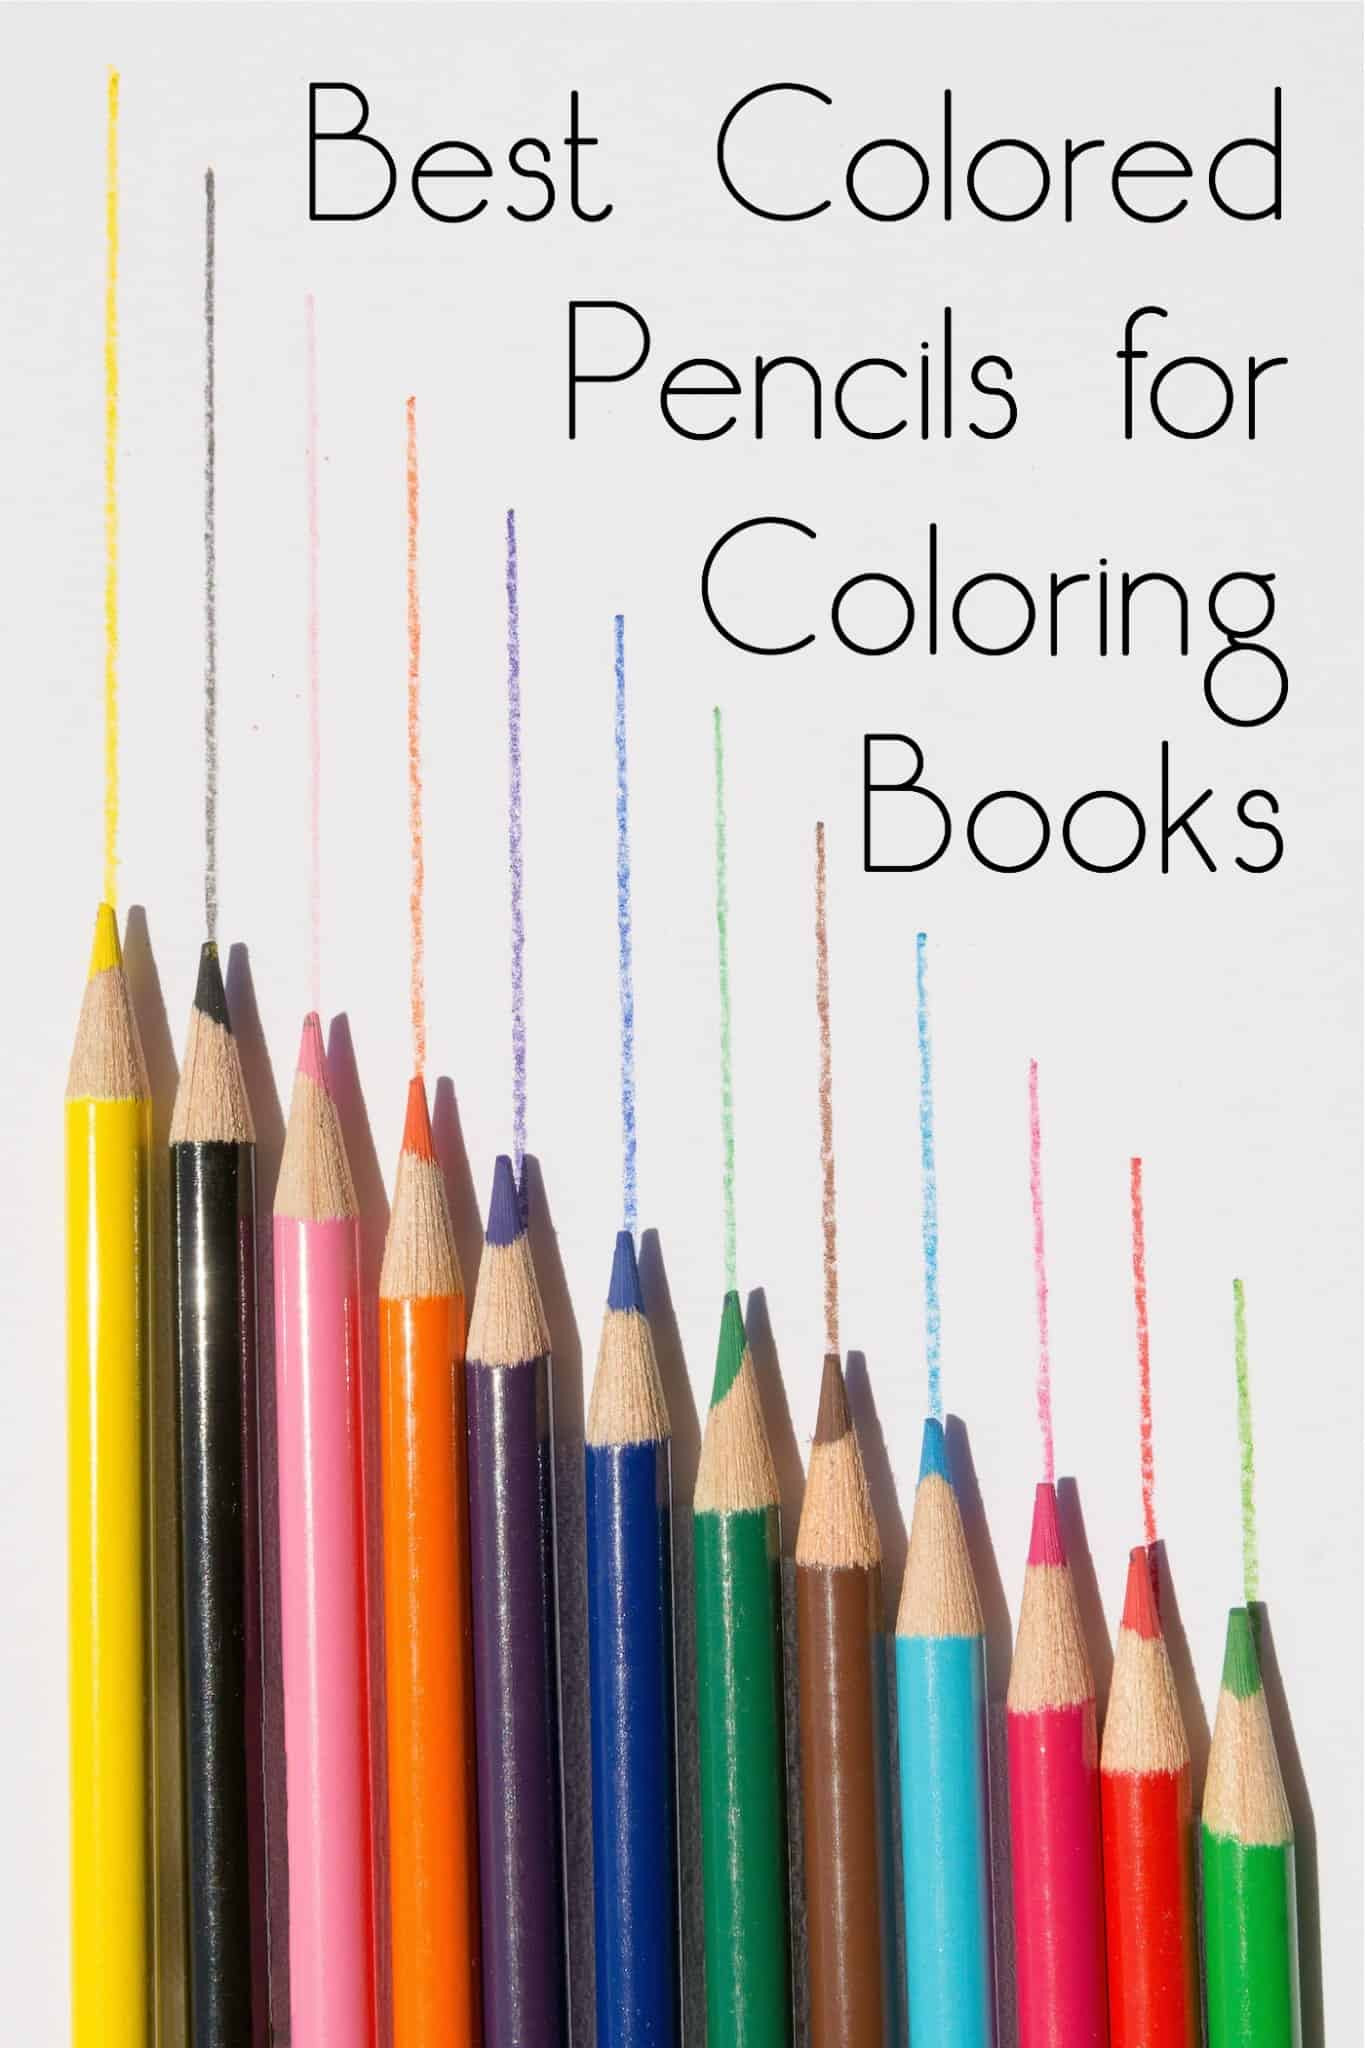 Adult Coloring Books And Pencils
 Best Colored Pencils for Coloring Books DIY Candy